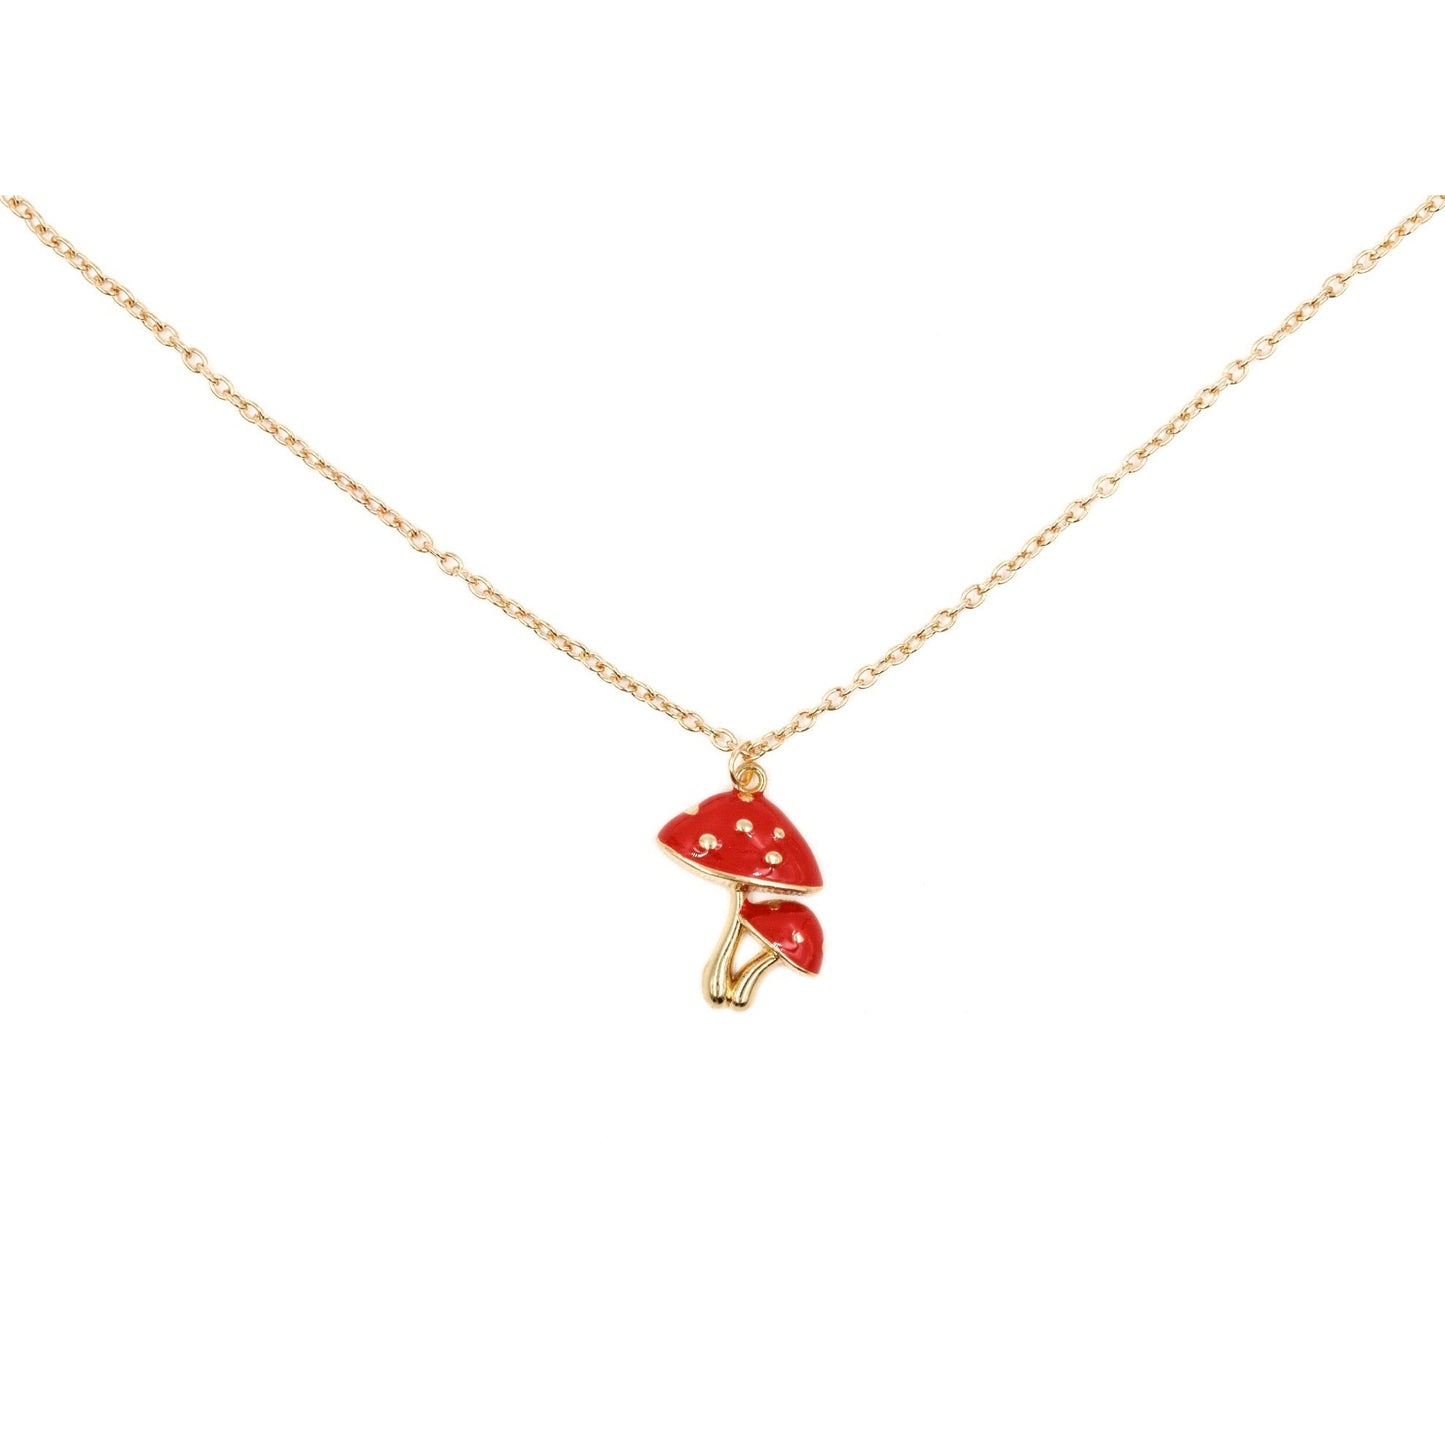 Forestcore Toadstool Mushroom Charm Necklace in Gold in a Gift Box